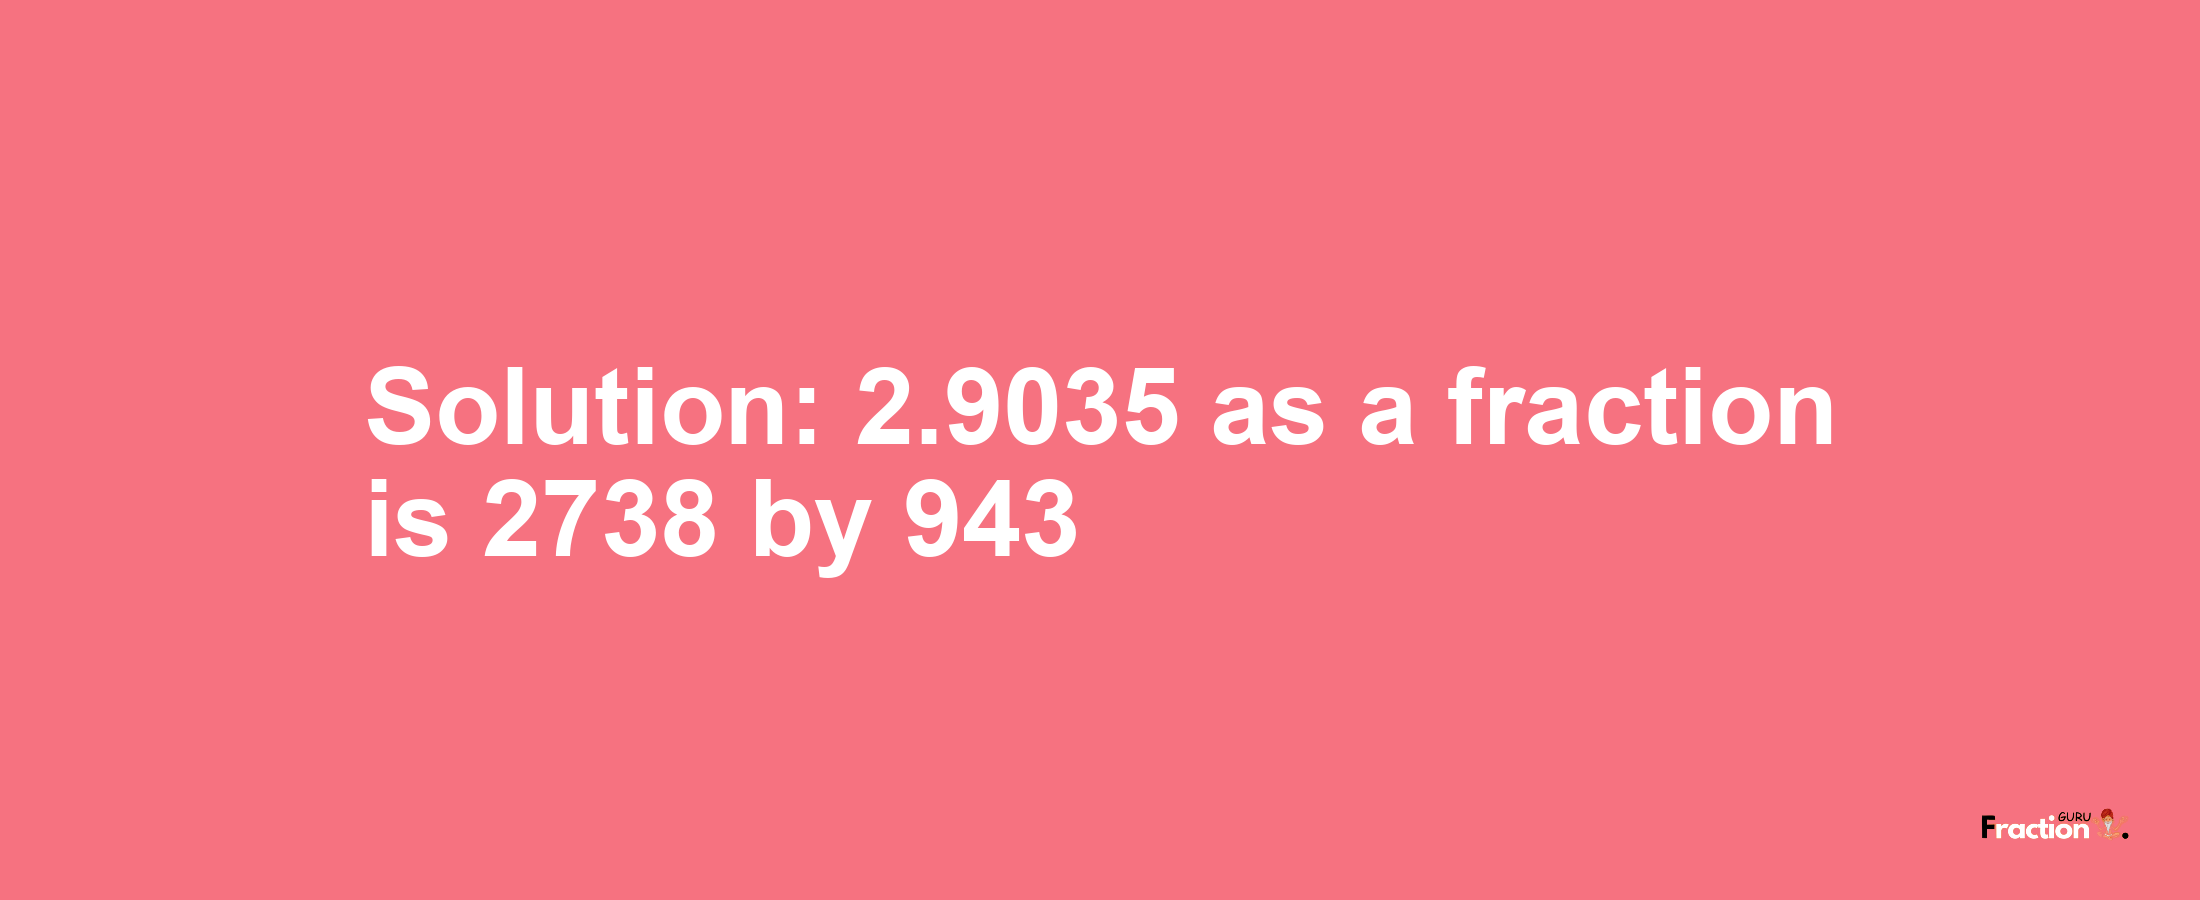 Solution:2.9035 as a fraction is 2738/943